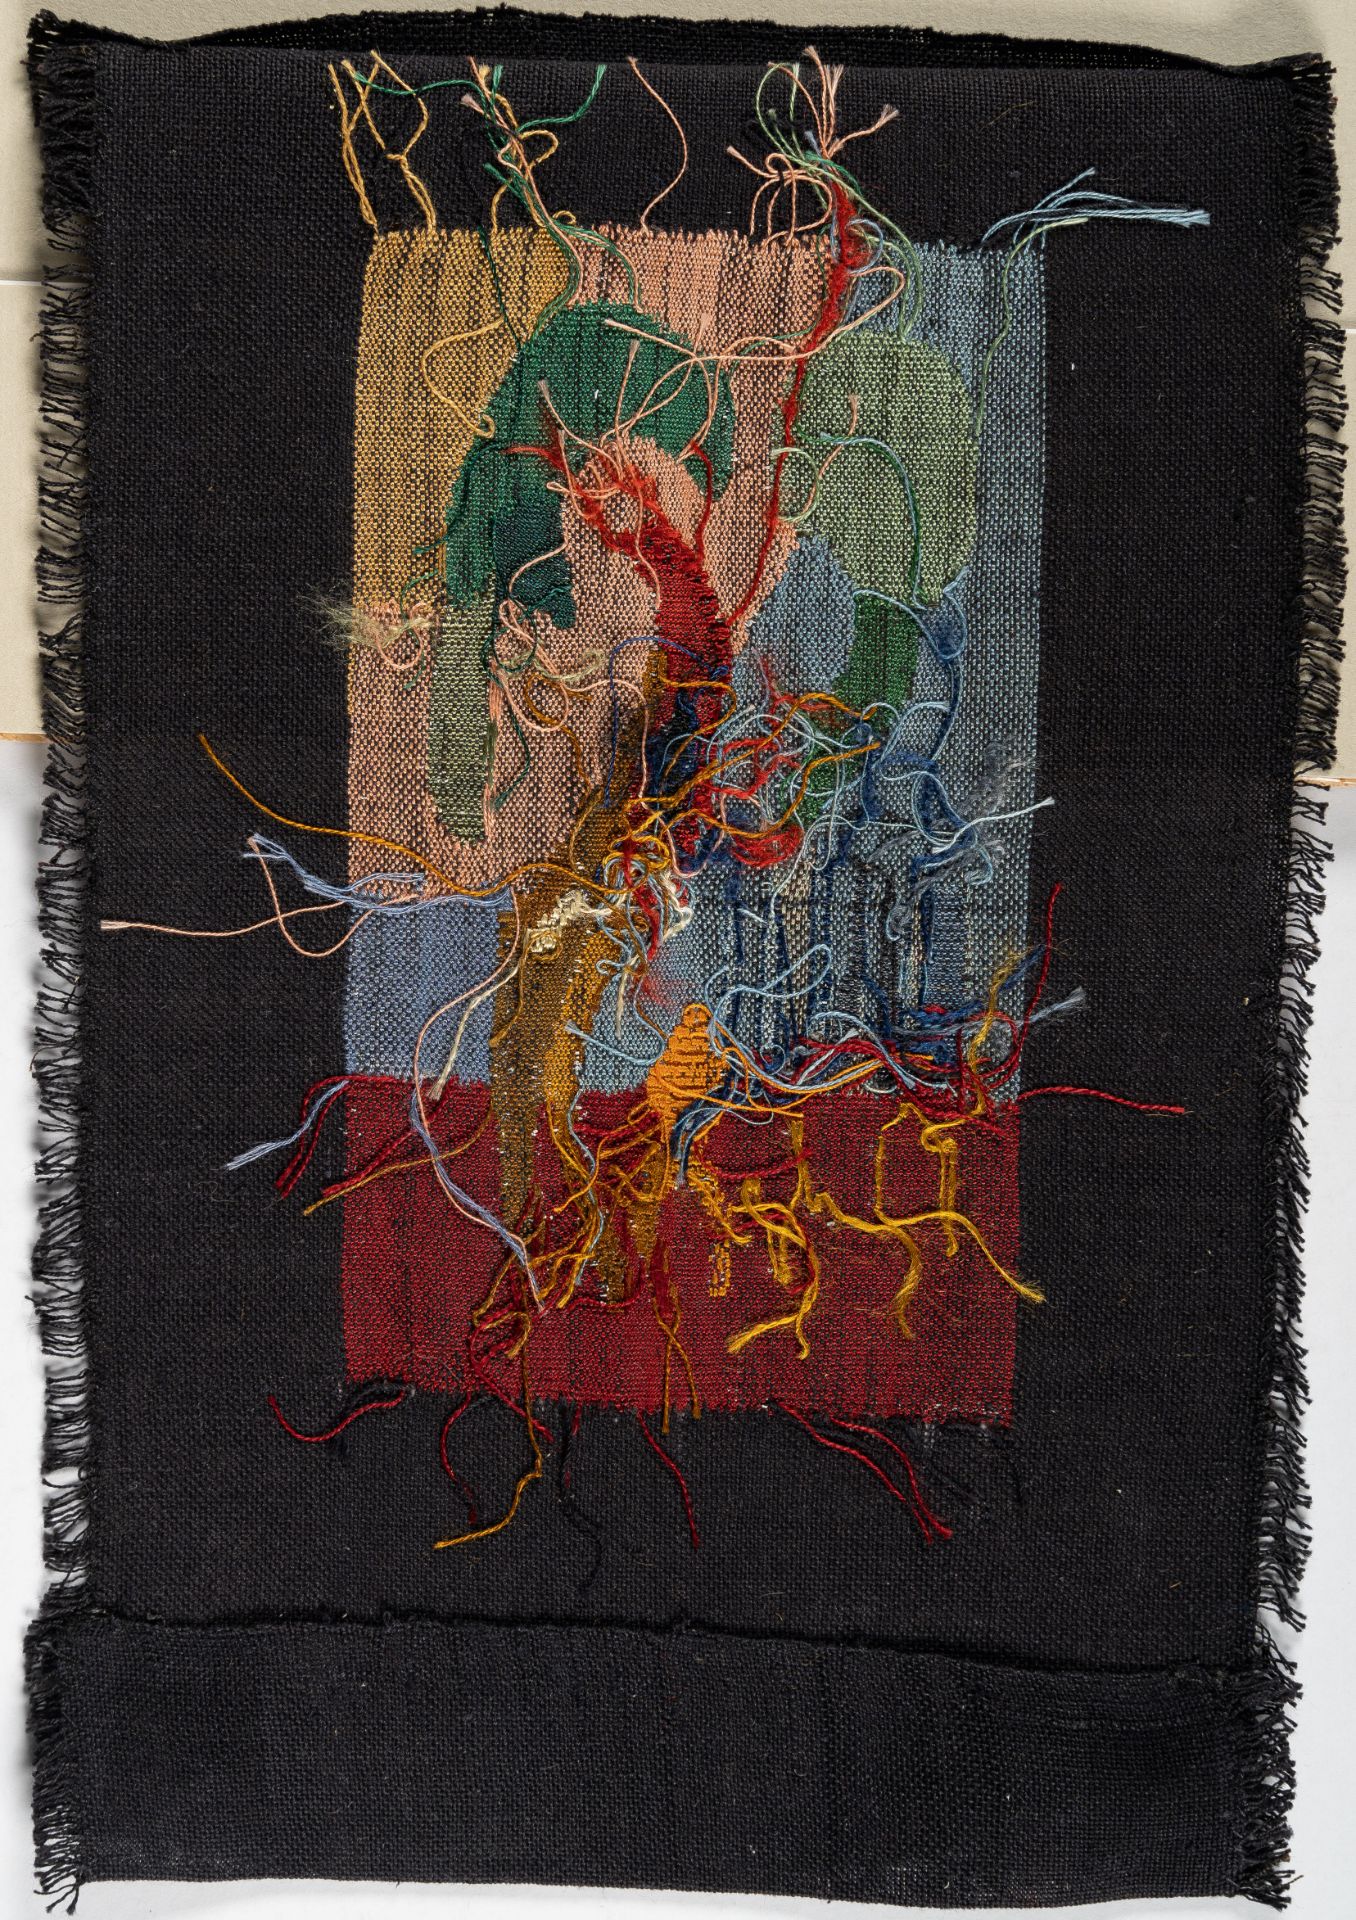 Woty Werner, The youngest.Woven wool. (19)49. Ca. 30.5 x 19.5 cm. Signed and dated lower right. - Image 3 of 3